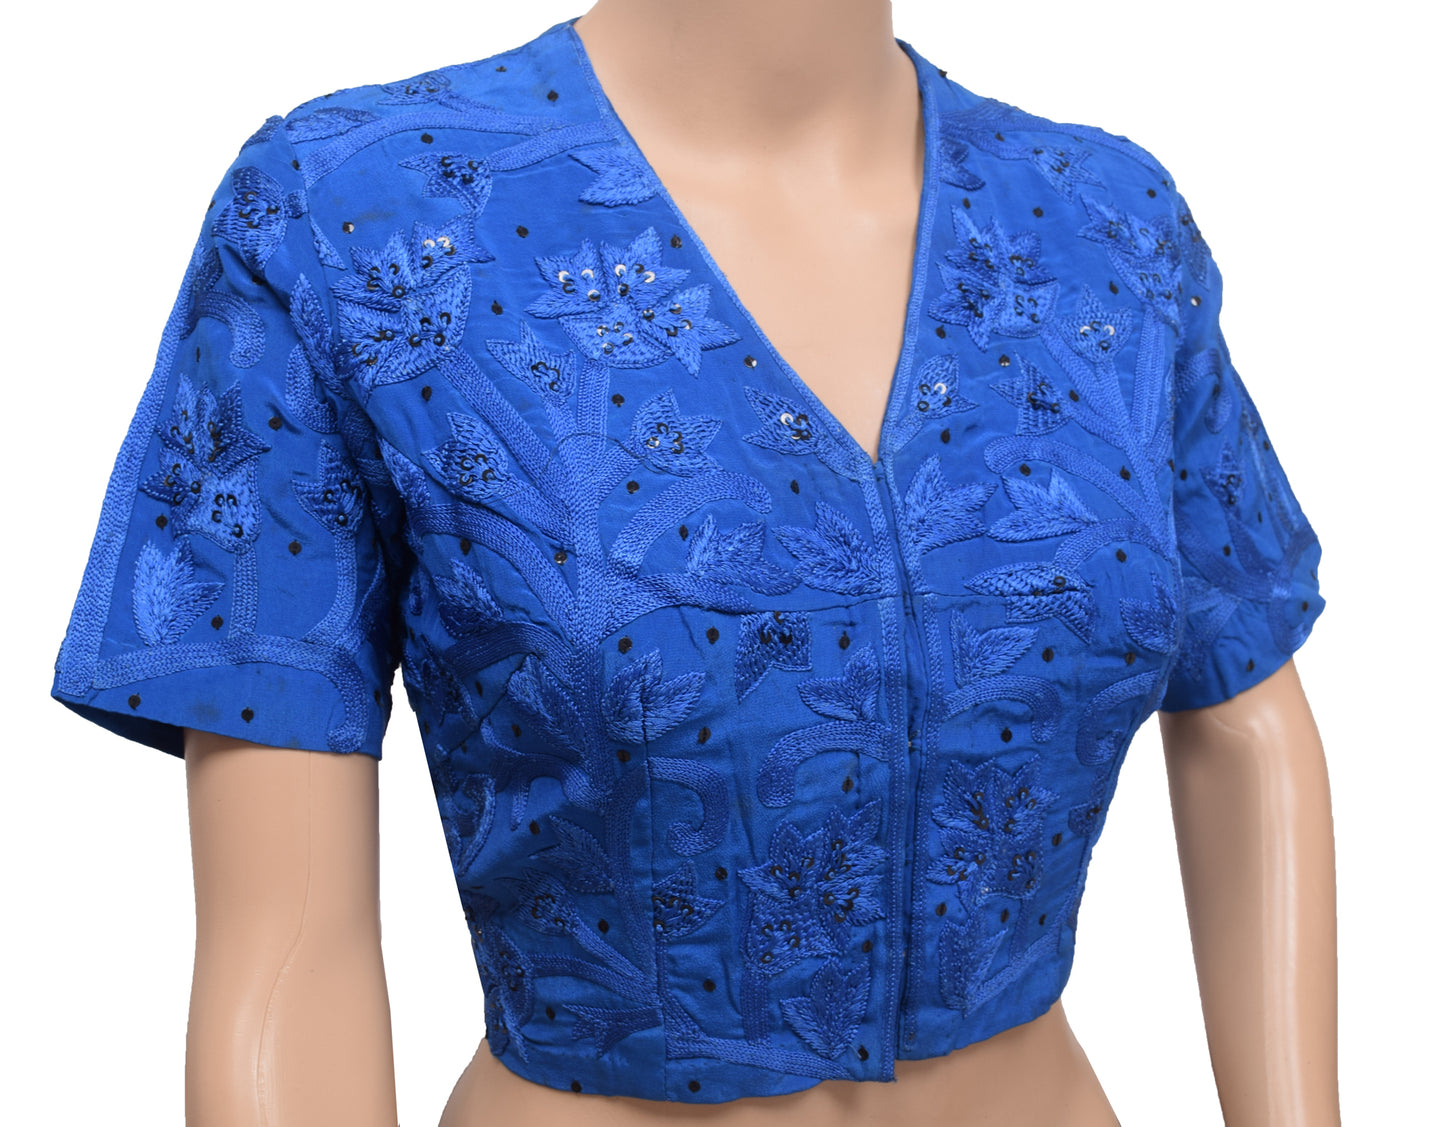 Sushila Vintage Readymade Stitched Sari Blouse Pure Crepe Blue Embroidered Top